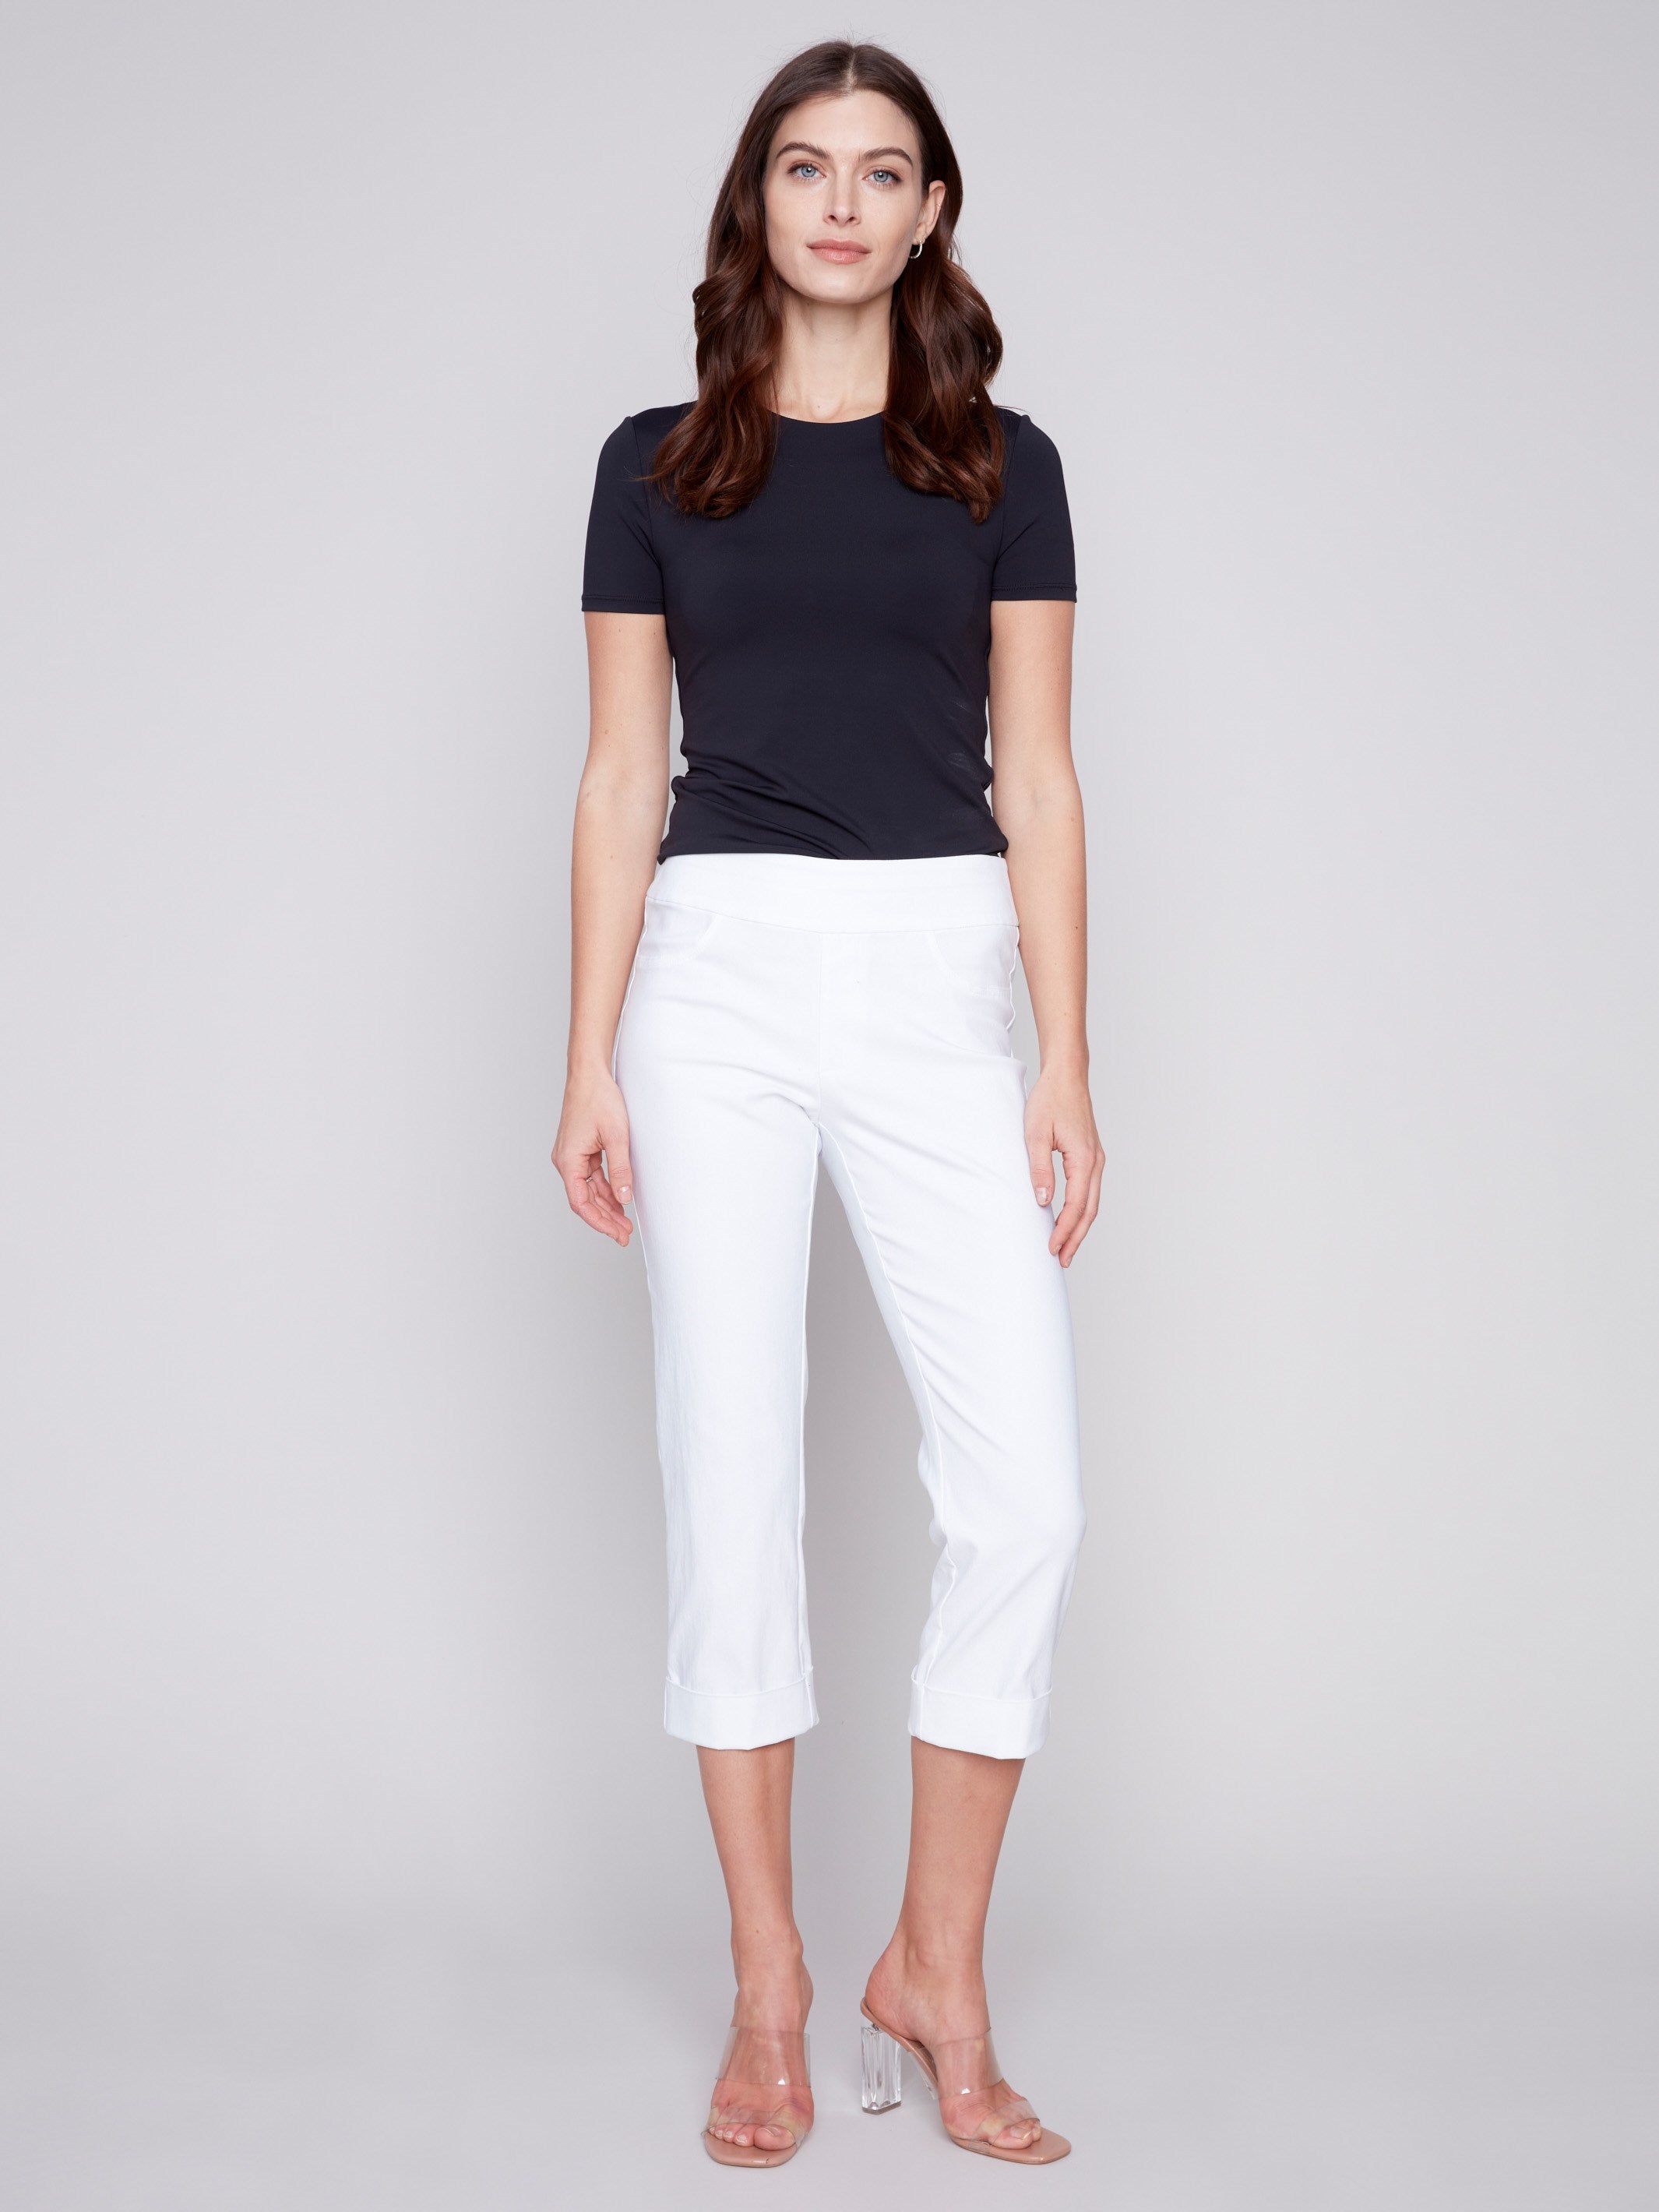 Stretch Pull-On Capri Pants - White - Charlie B Collection Canada - Image 4